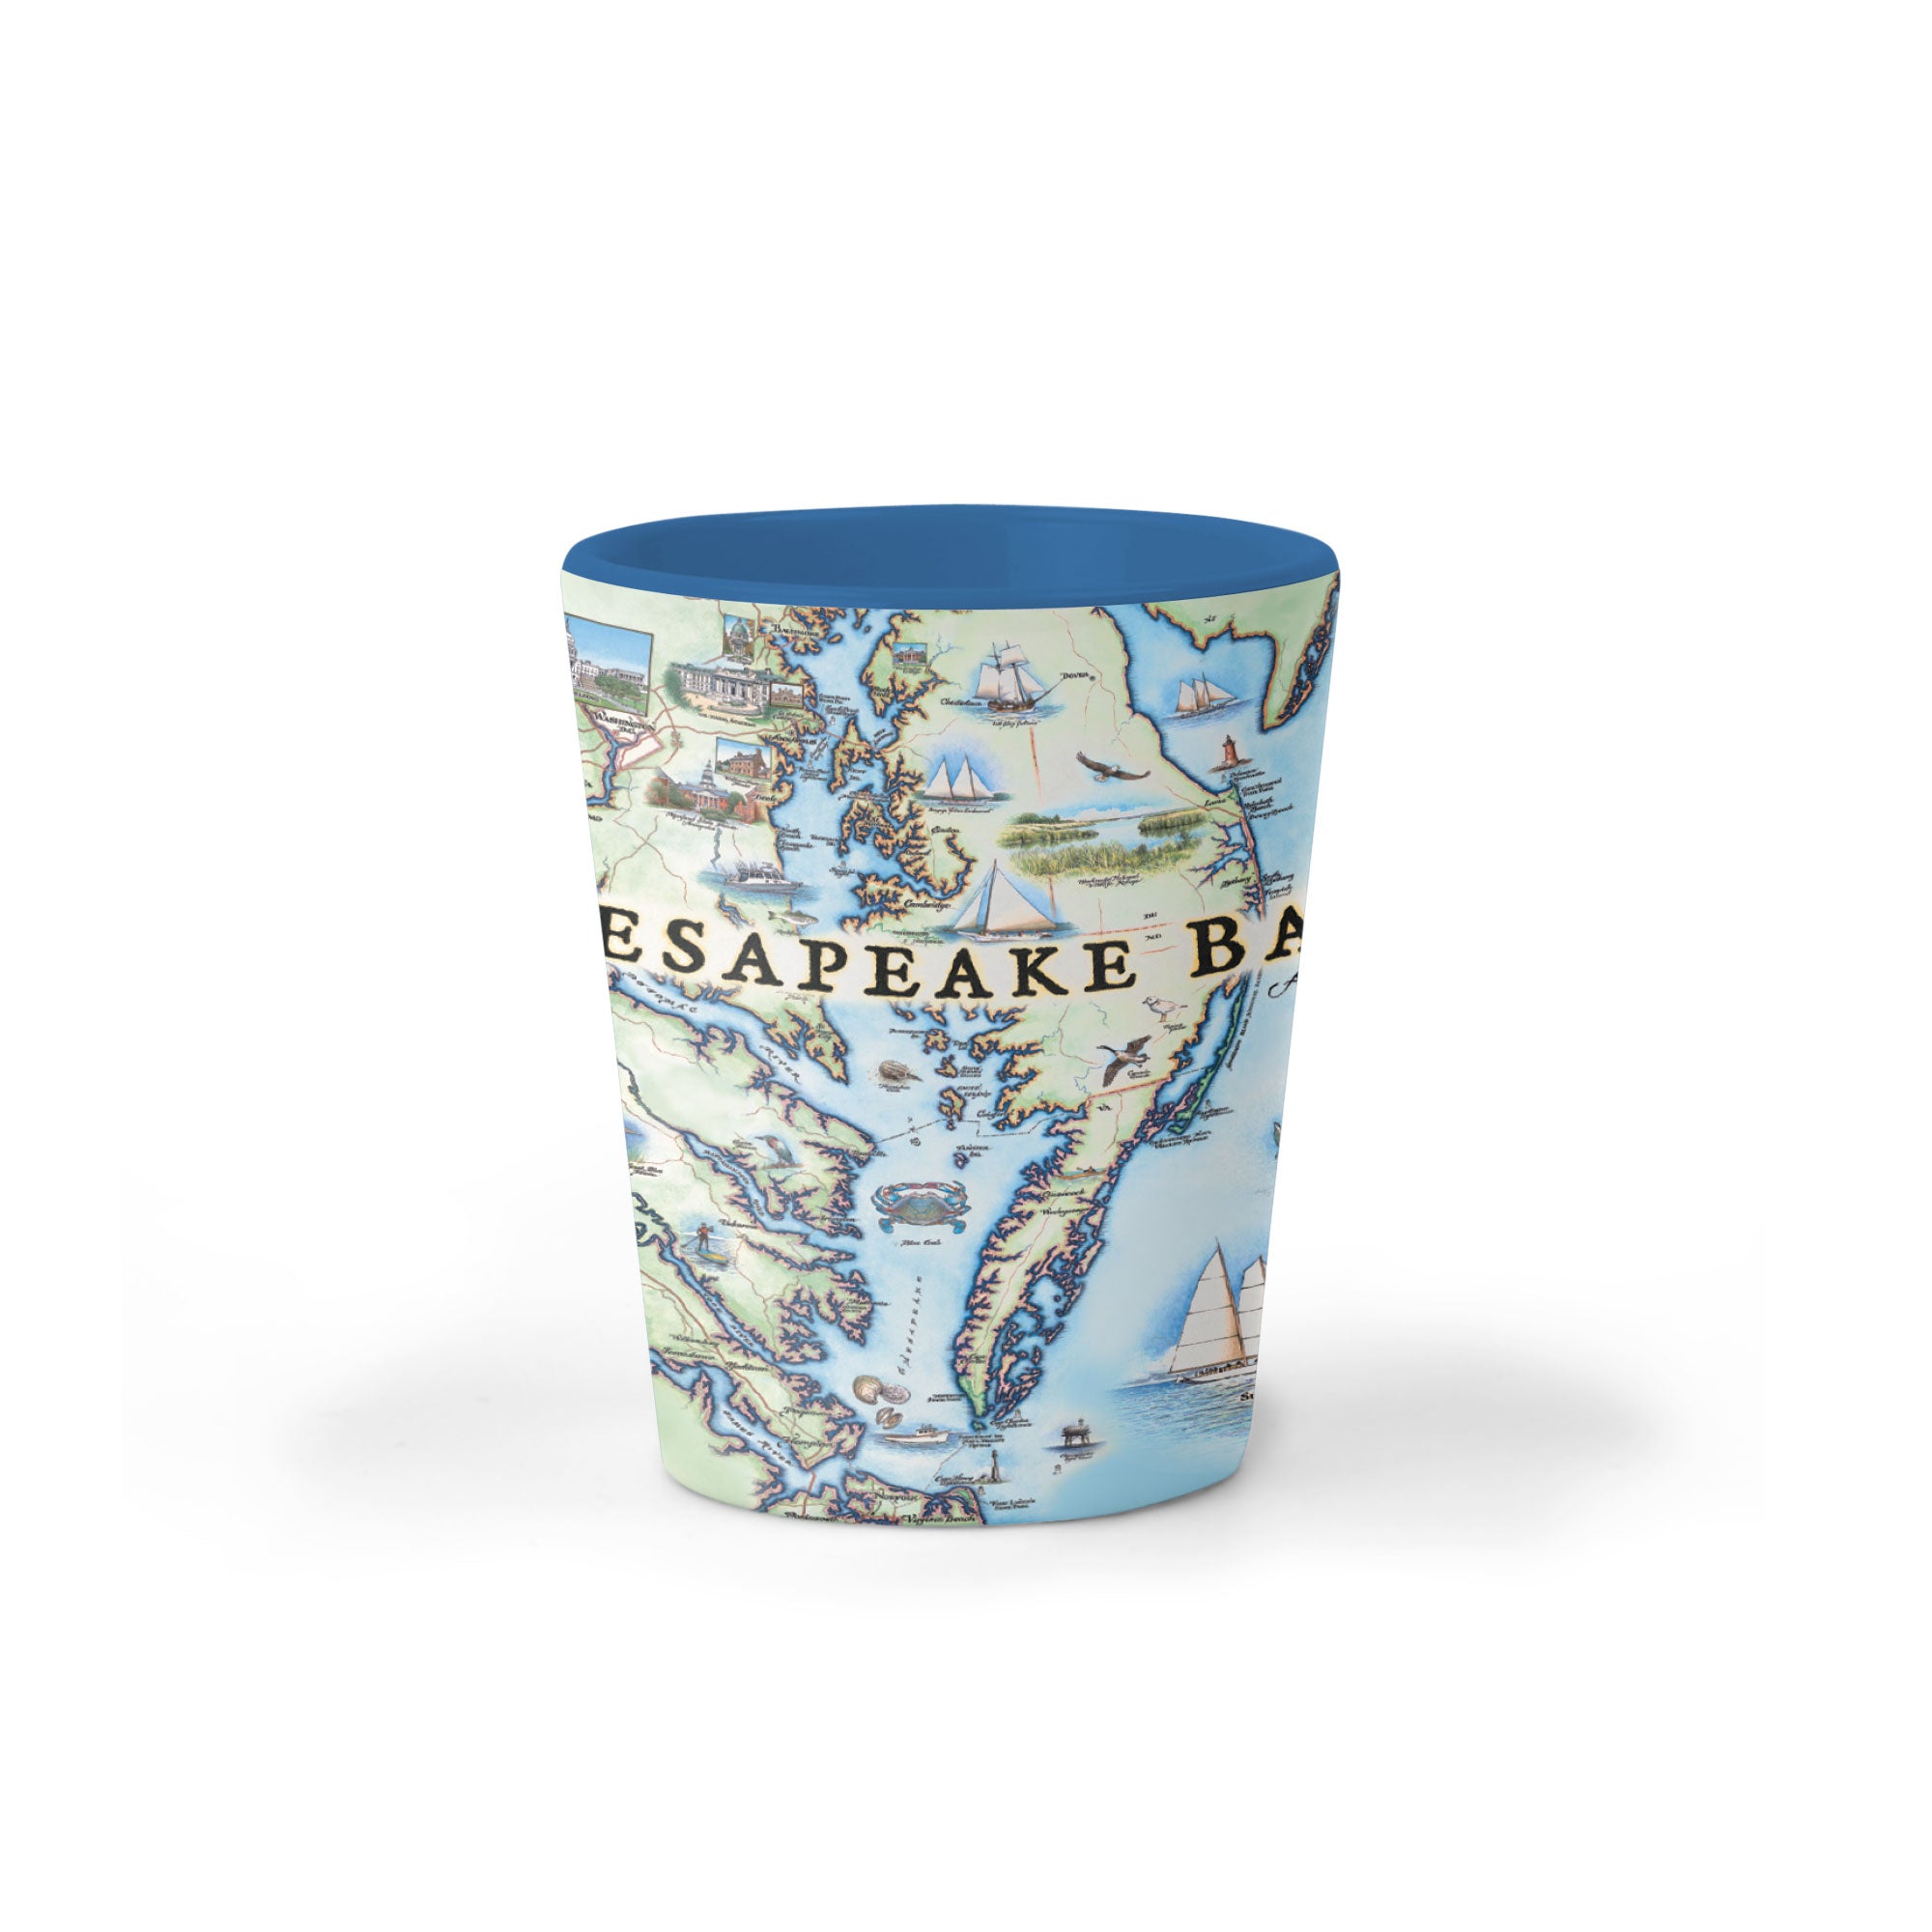 Chesapeake Bay Map Ceramic shot glass featuring illustrations of boat craft and marine life. Places on the map include Baltimore, Annapolis, Cambridge, Yorktown, and the Chesapeake Bay Bridge.